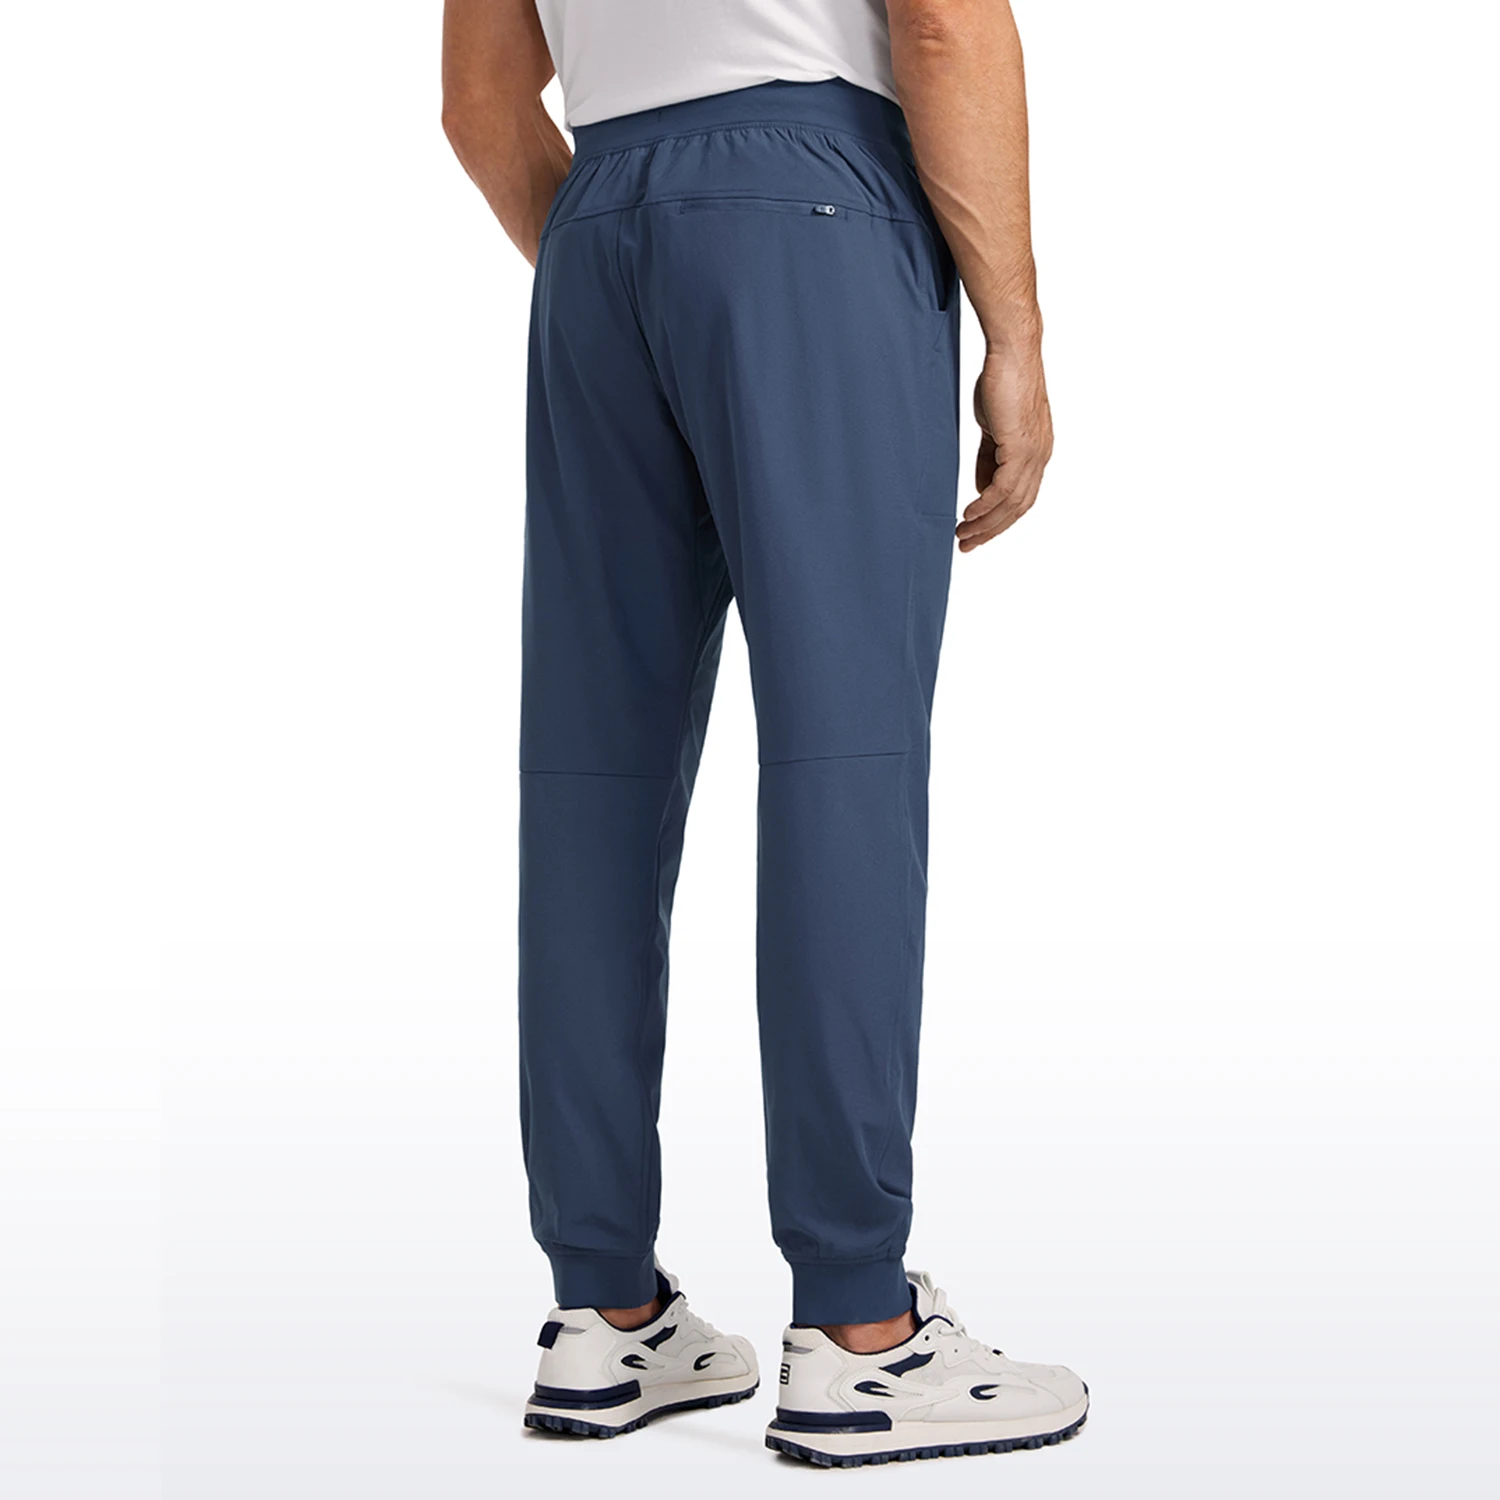 CRZ YOGA All-Day Comfort Golf Joggers Pants for Men 30'' Quick Dry